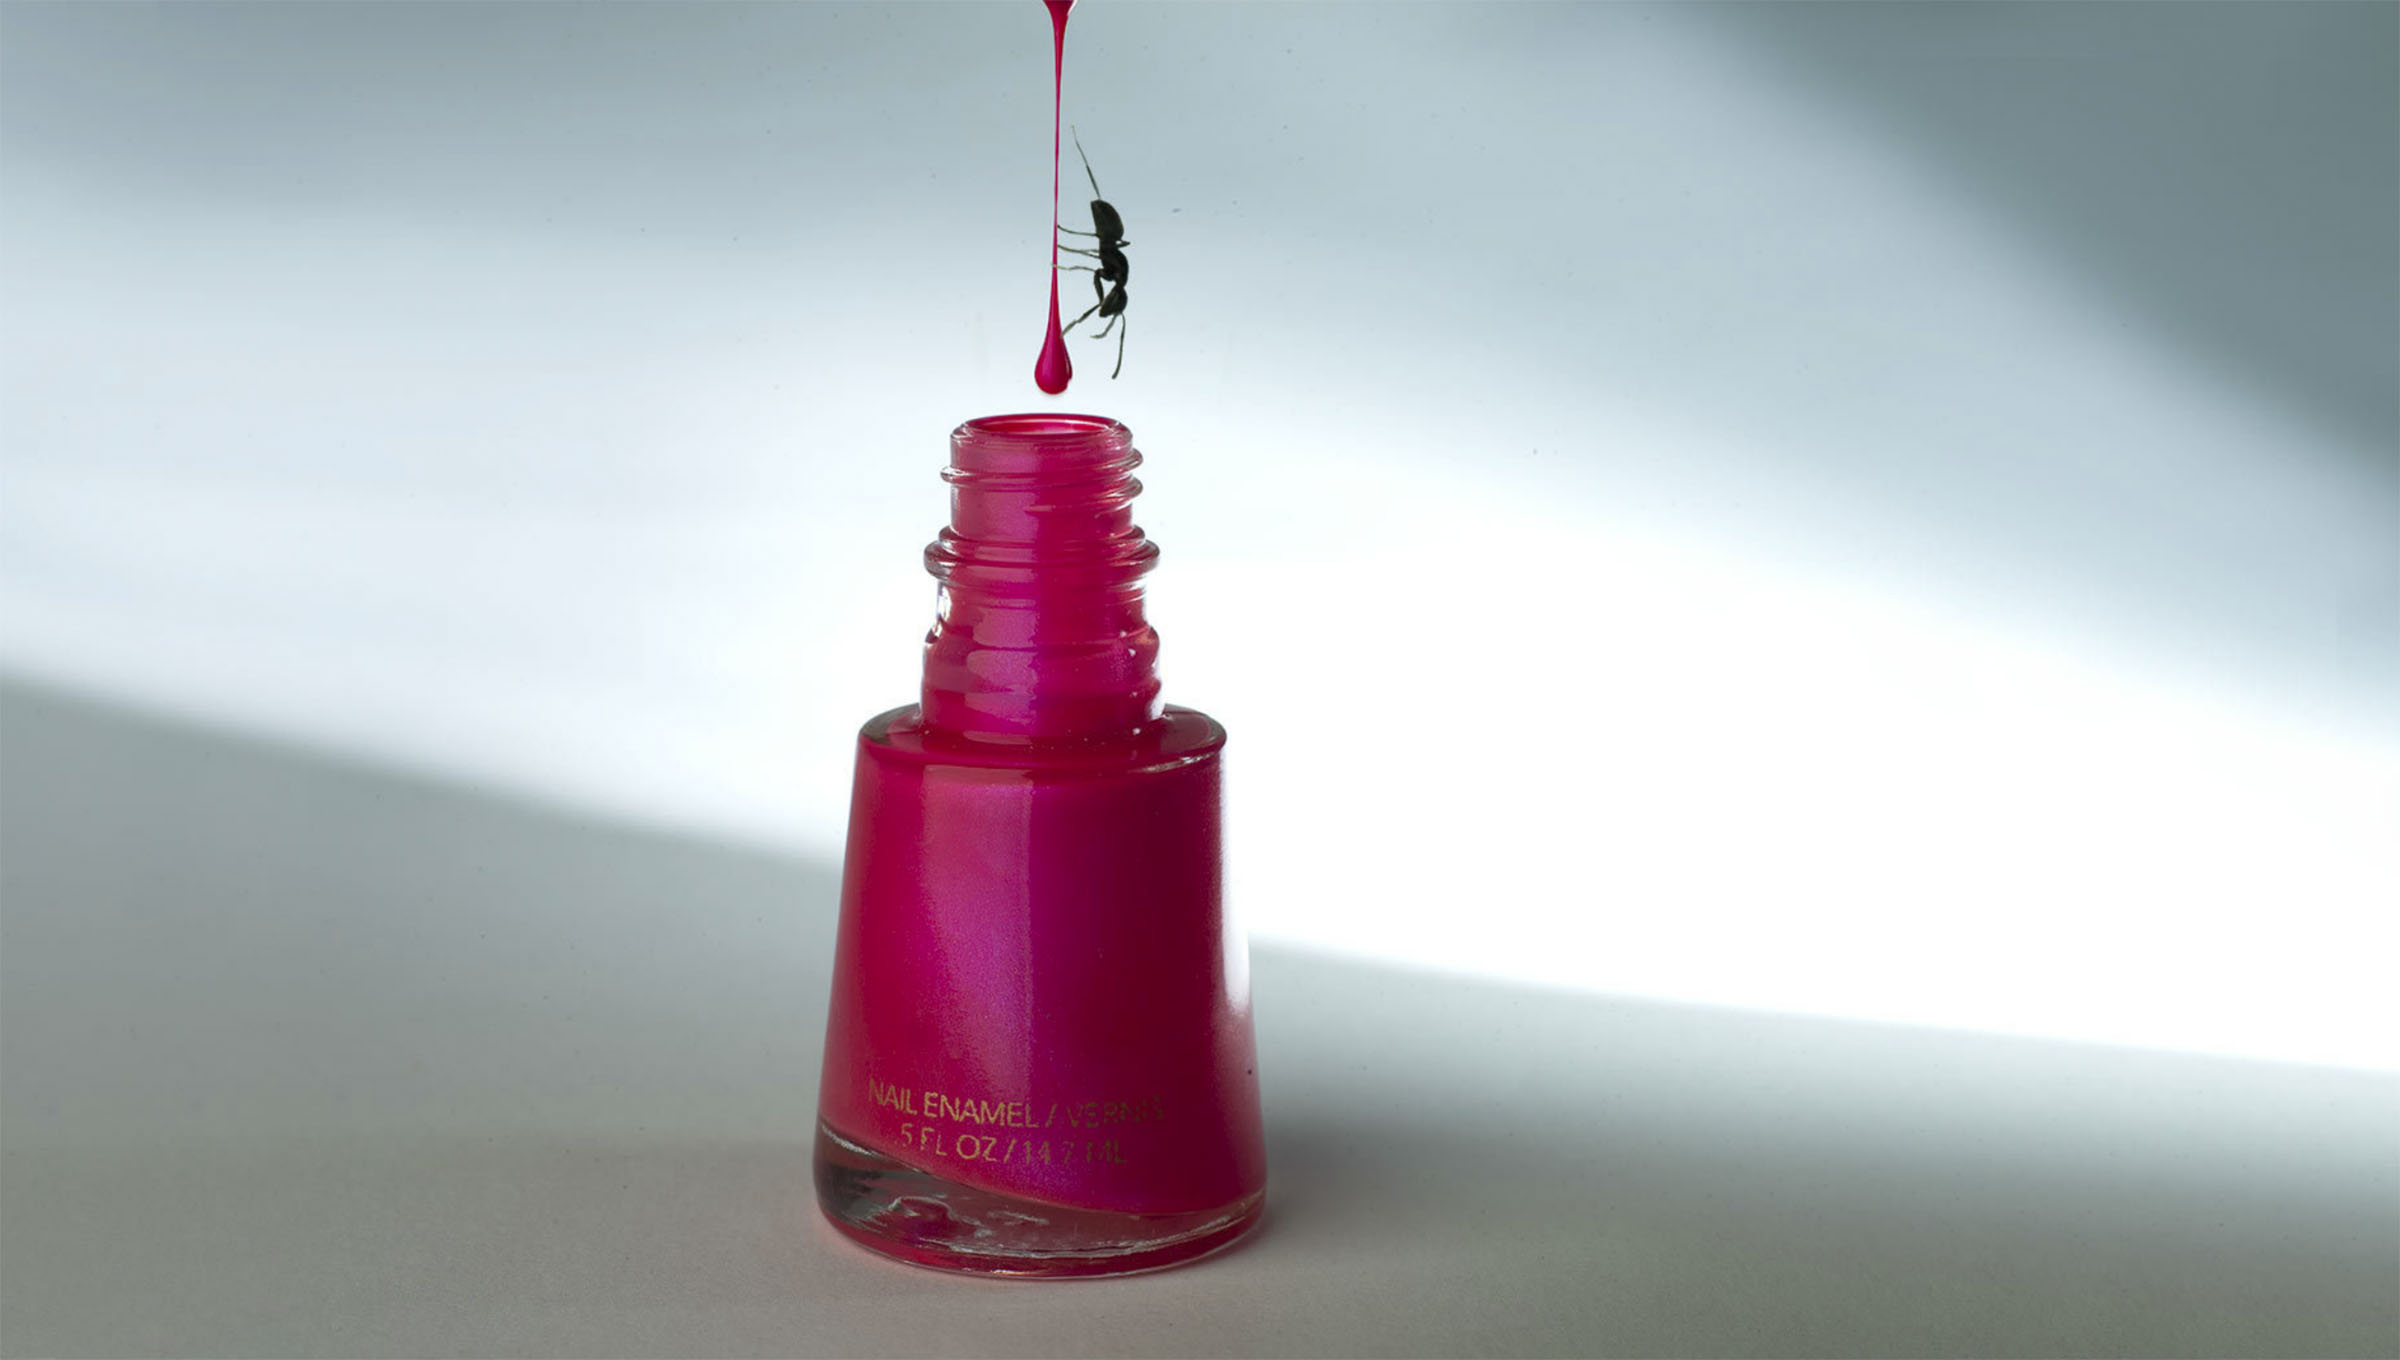 Lady Revlon Nail Polish Enamel Product Photography with Ant Climbing Down lustrous drip drop By Wick Beavers creative advertising product Photographer NYC LA Rome Paris London